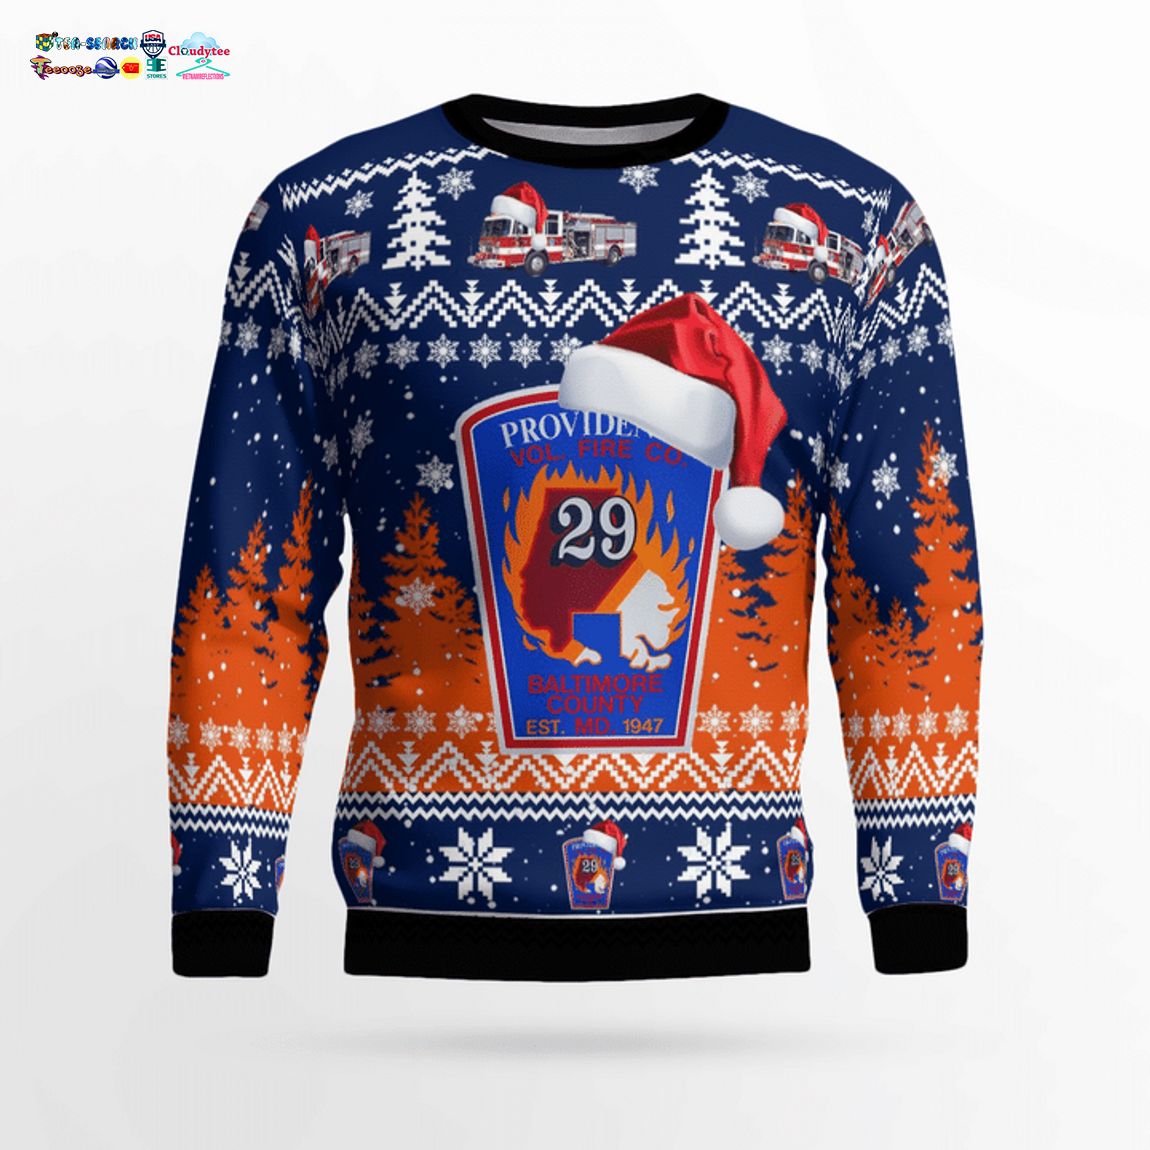 Maryland Providence Volunteer Fire Company 3D Christmas Sweater